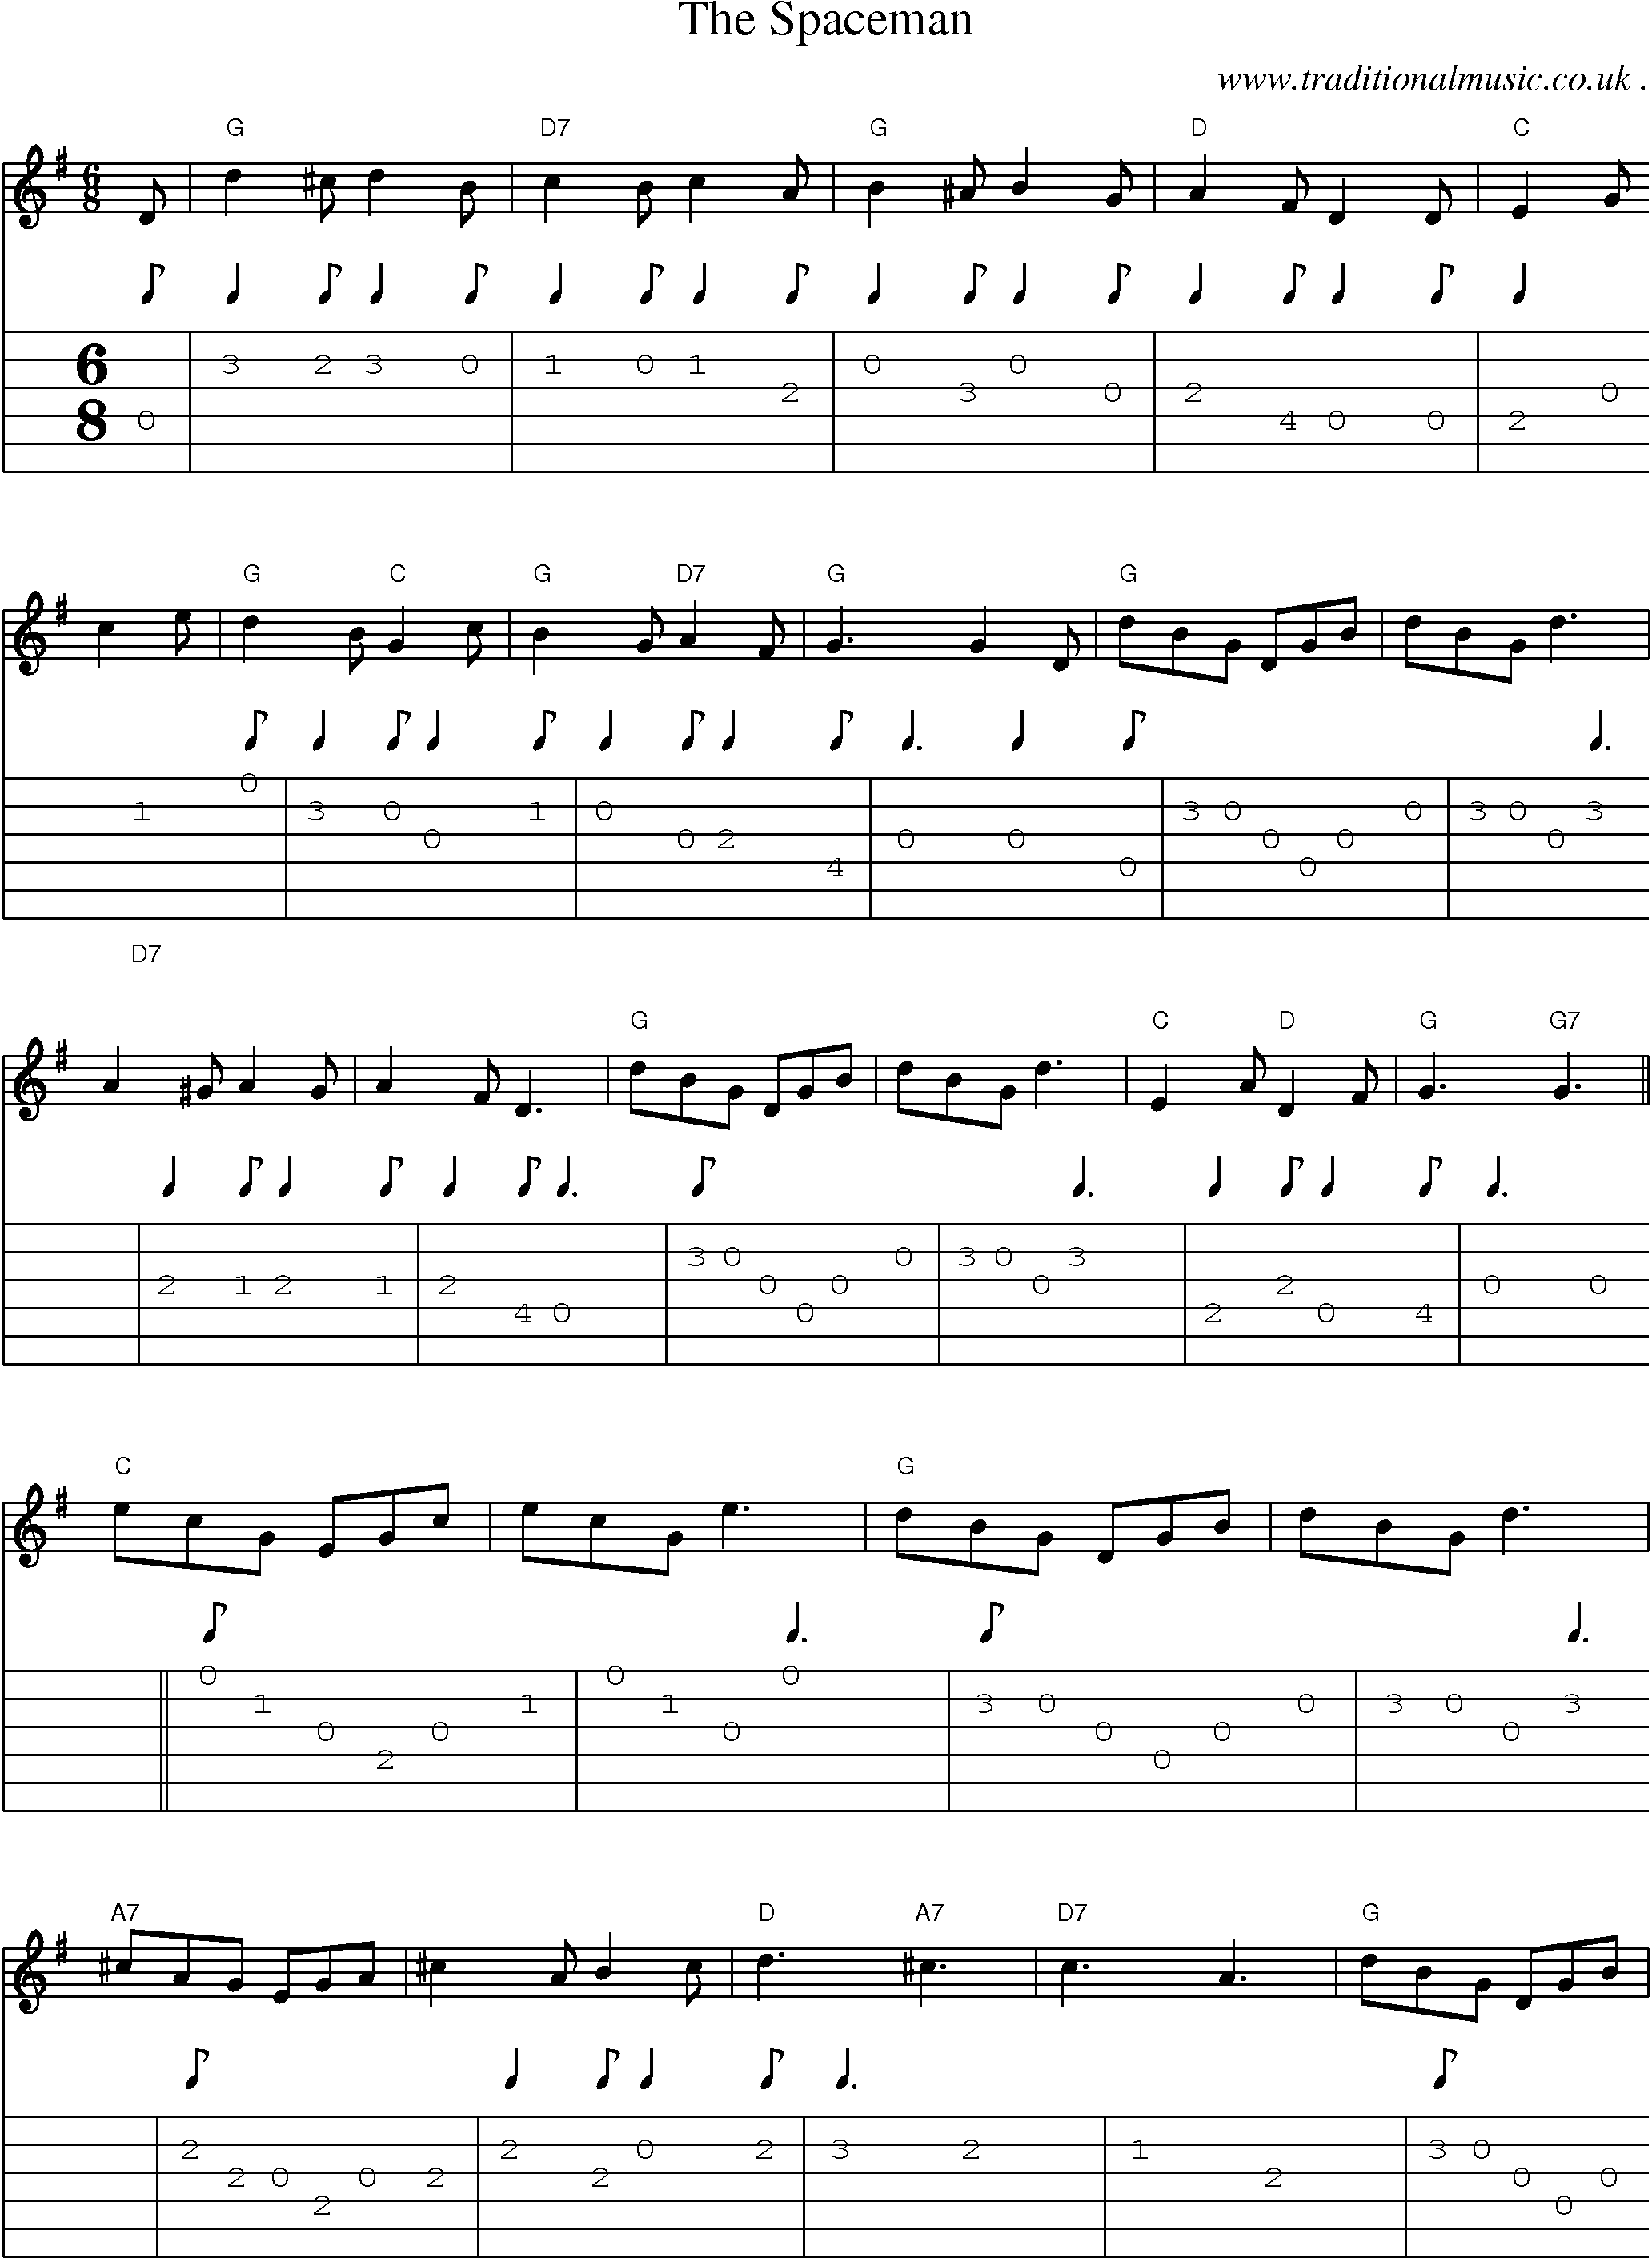 Sheet-Music and Guitar Tabs for The Spaceman